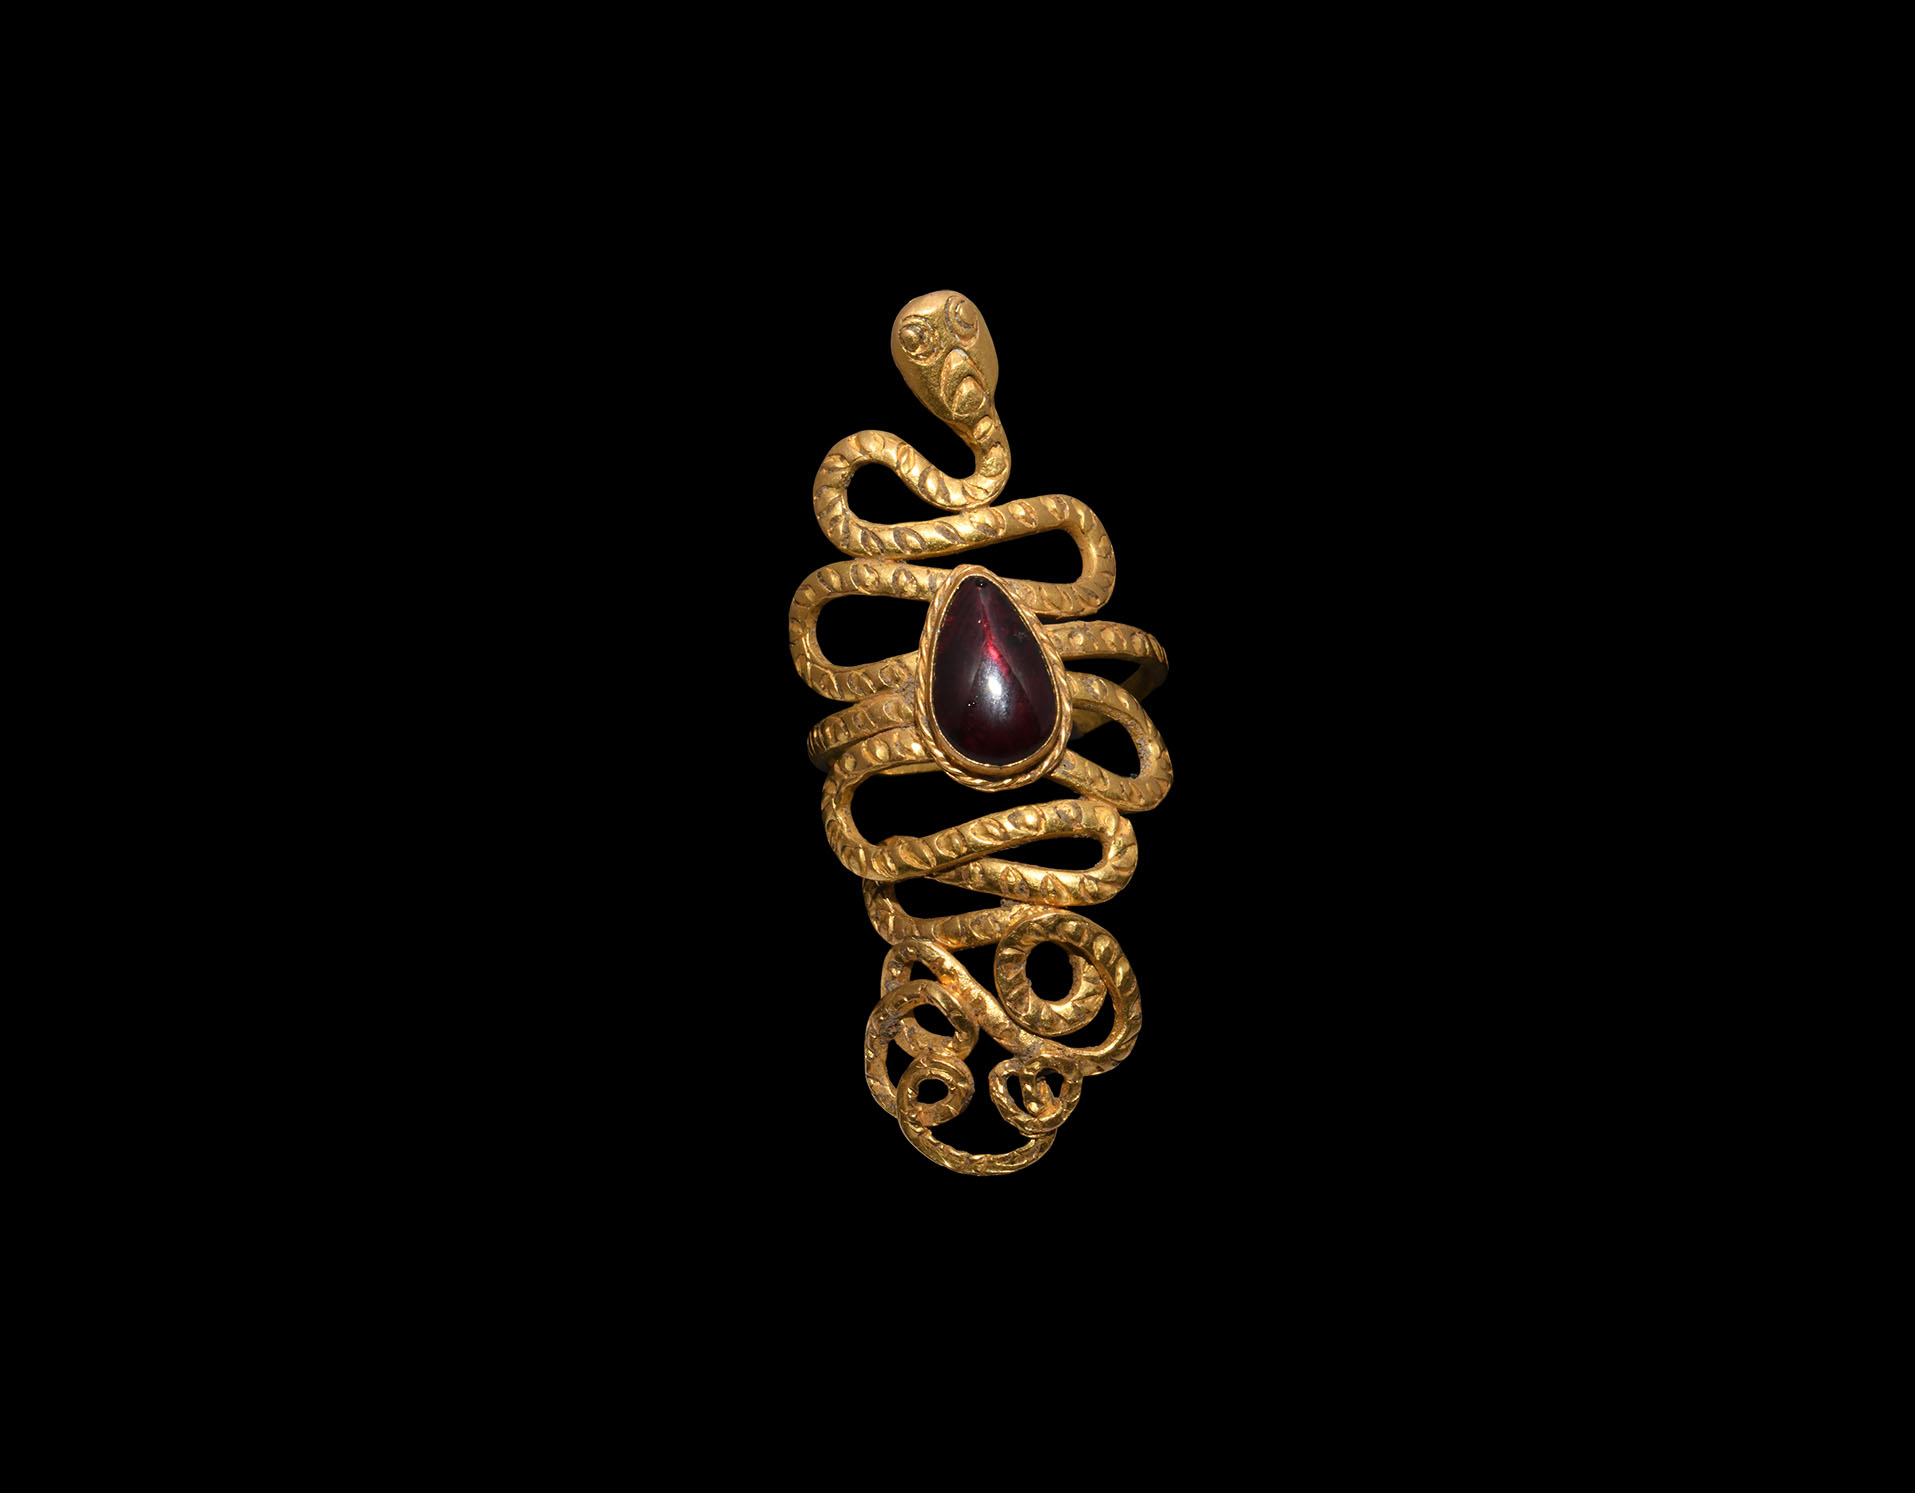 Egyptian Gold Snake Ring with Garnet Cabochon